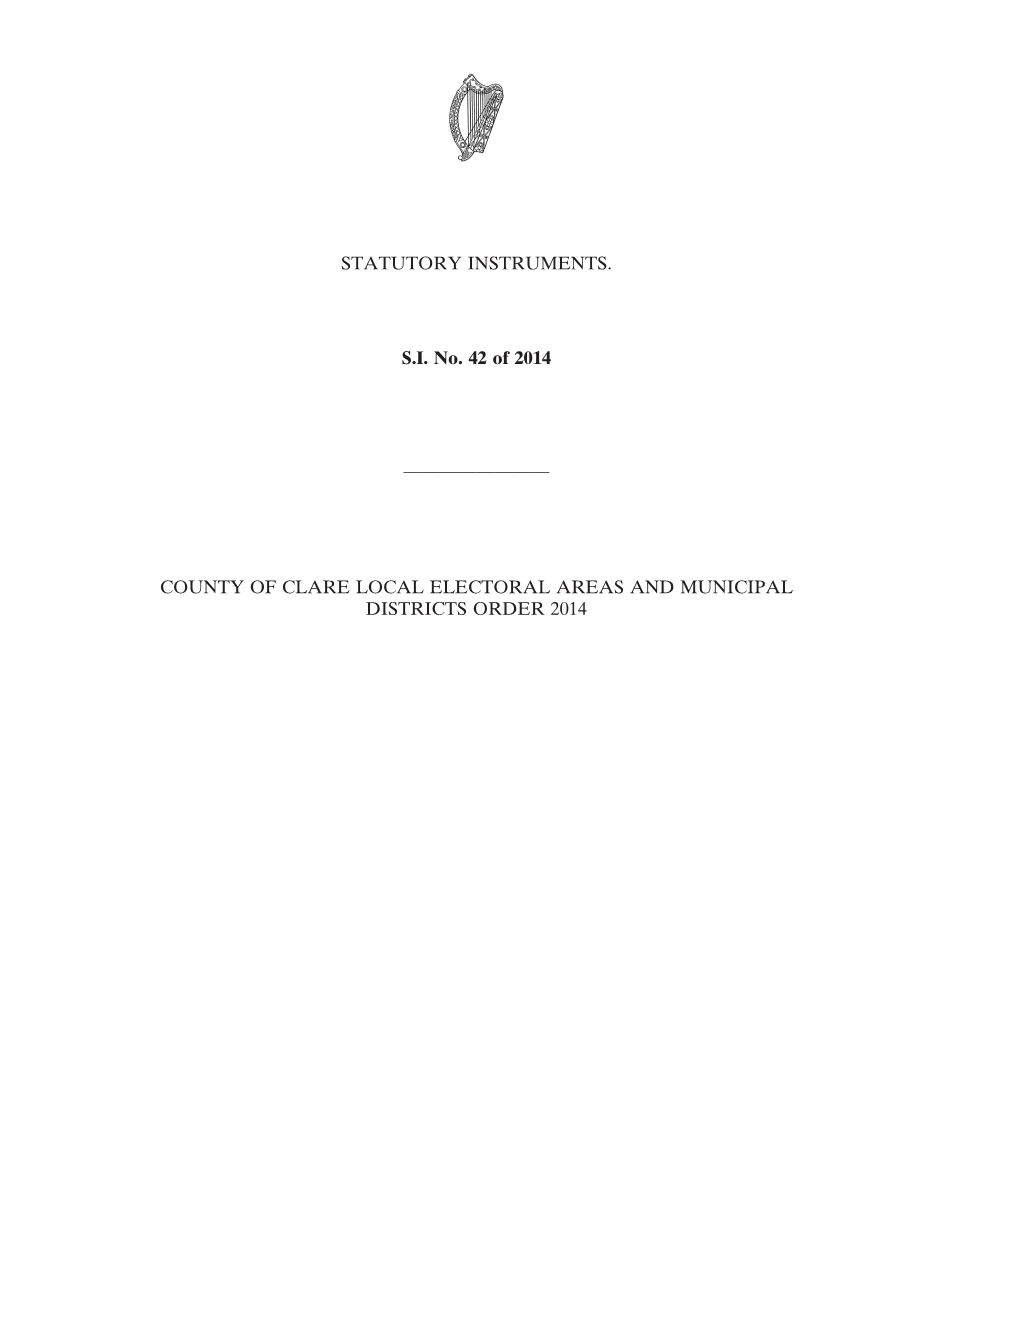 County of Clare Local Electoral Areas and Municipal Districts Order 2014 2 [42]